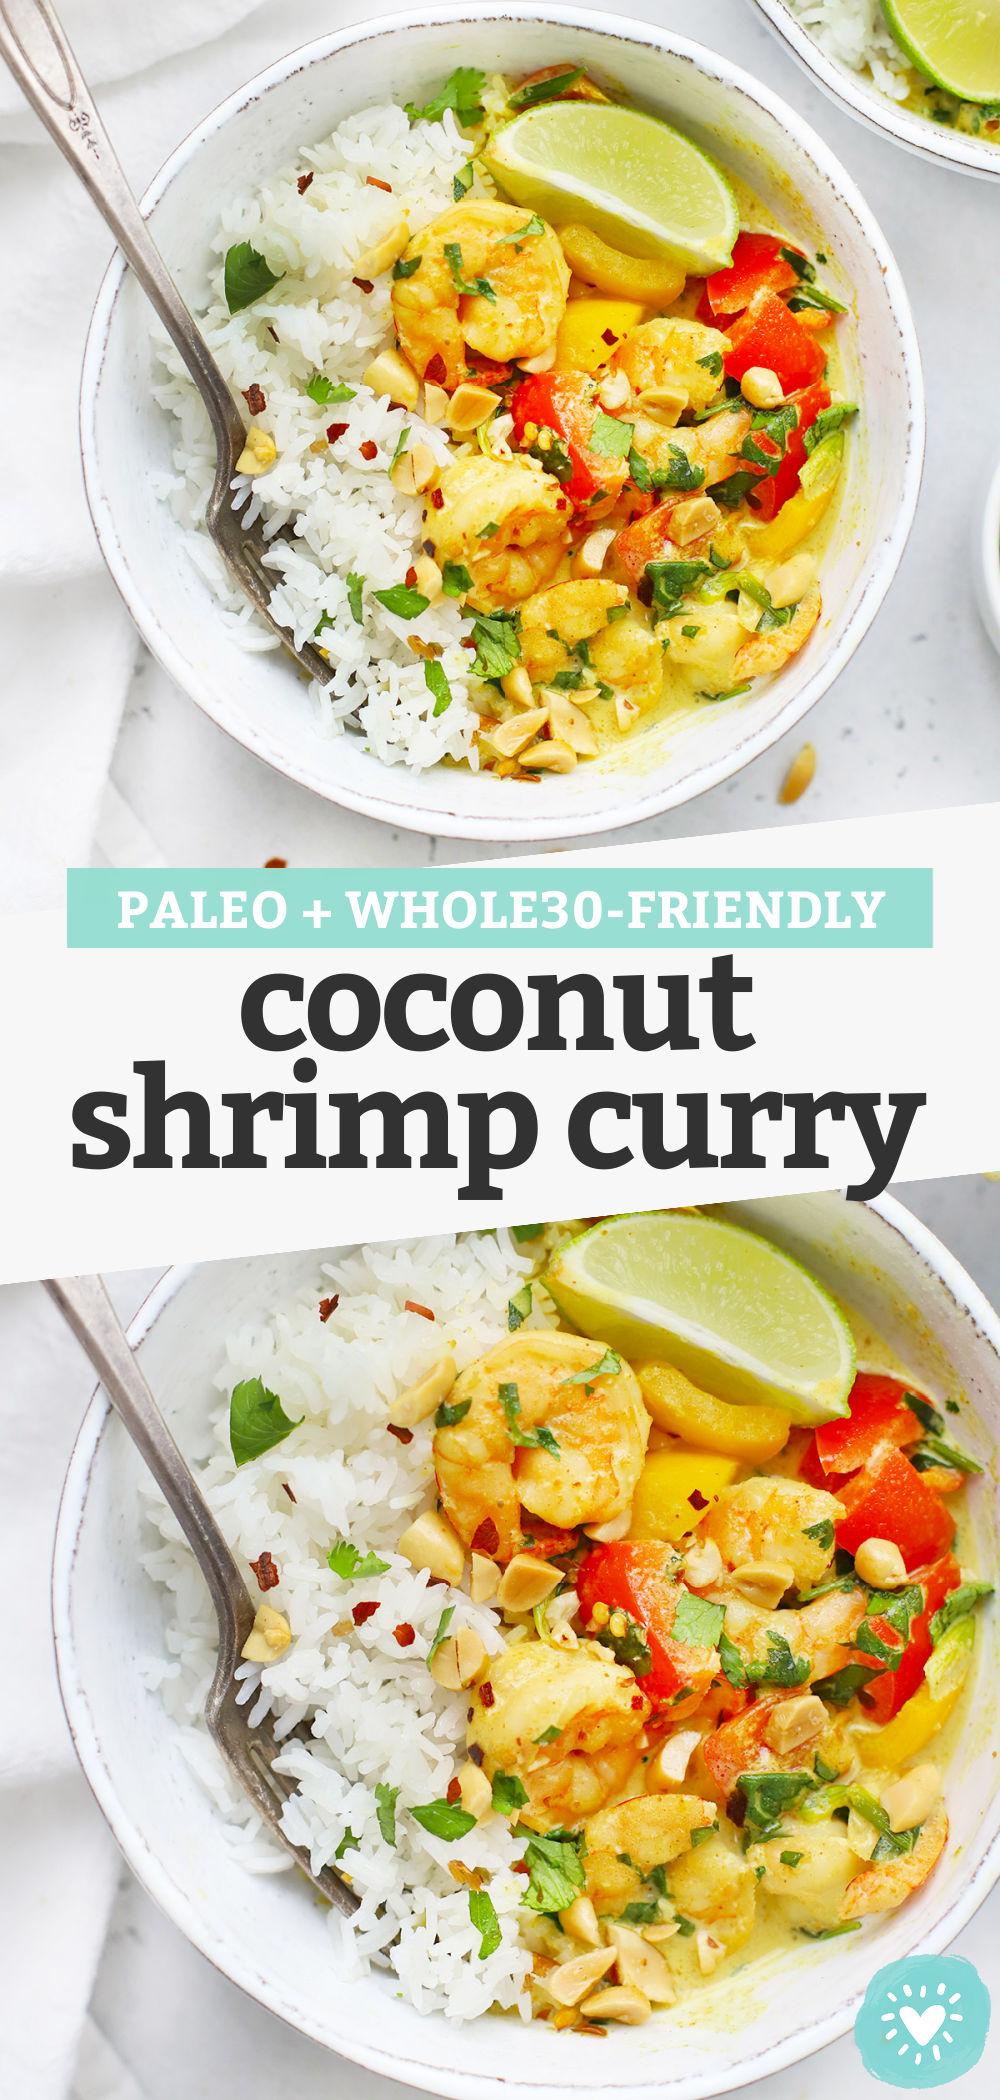 Creamy Coconut Shrimp Curry. This paleo shrimp curry recipe has a gorgeous coconut curry sauce and colorful veggies that make it extra special. // Shrimp curry recipe // healthy shrimp curry // easy shrimp curry #curry #shrimp #dinner #healthydinner #shrimpcurry #paleo #whole30